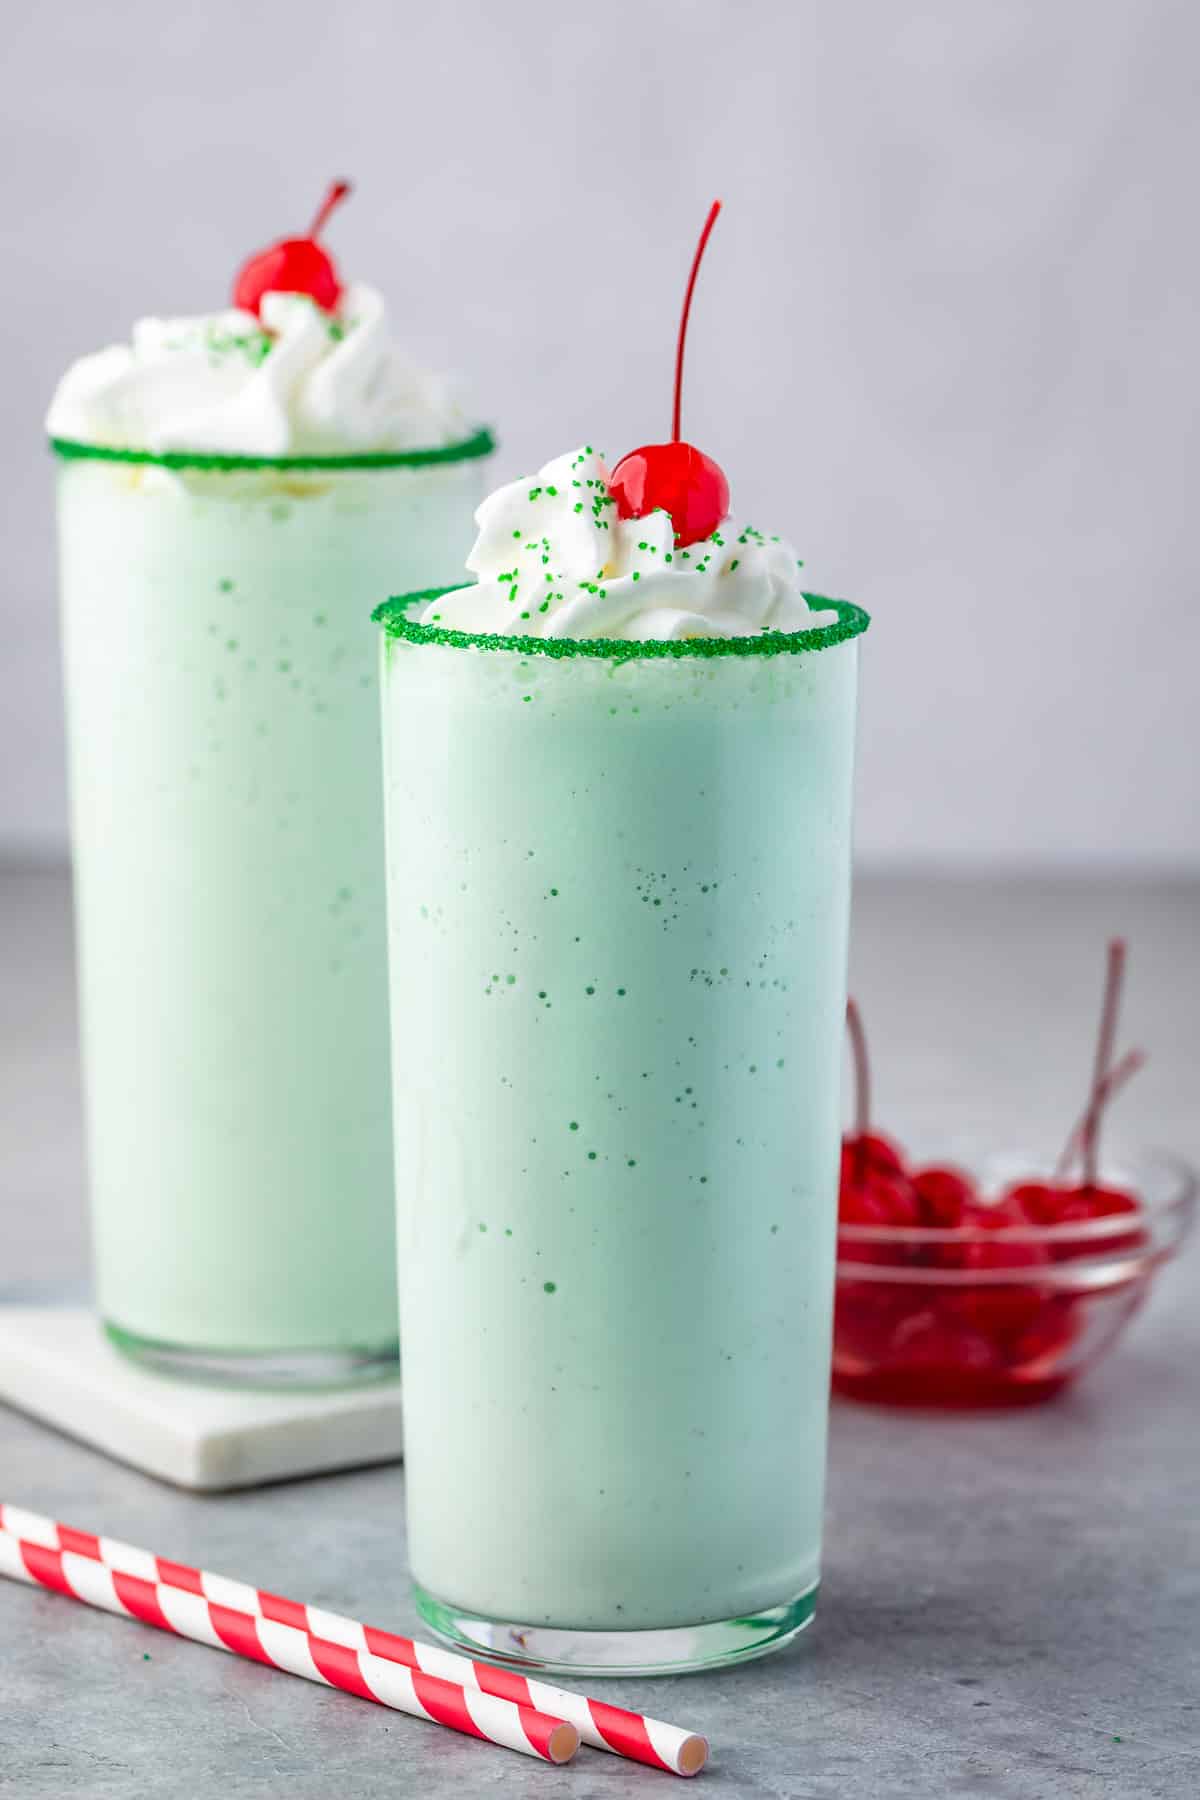 green shake in a clear glass topped with whipped cream and a cherry.